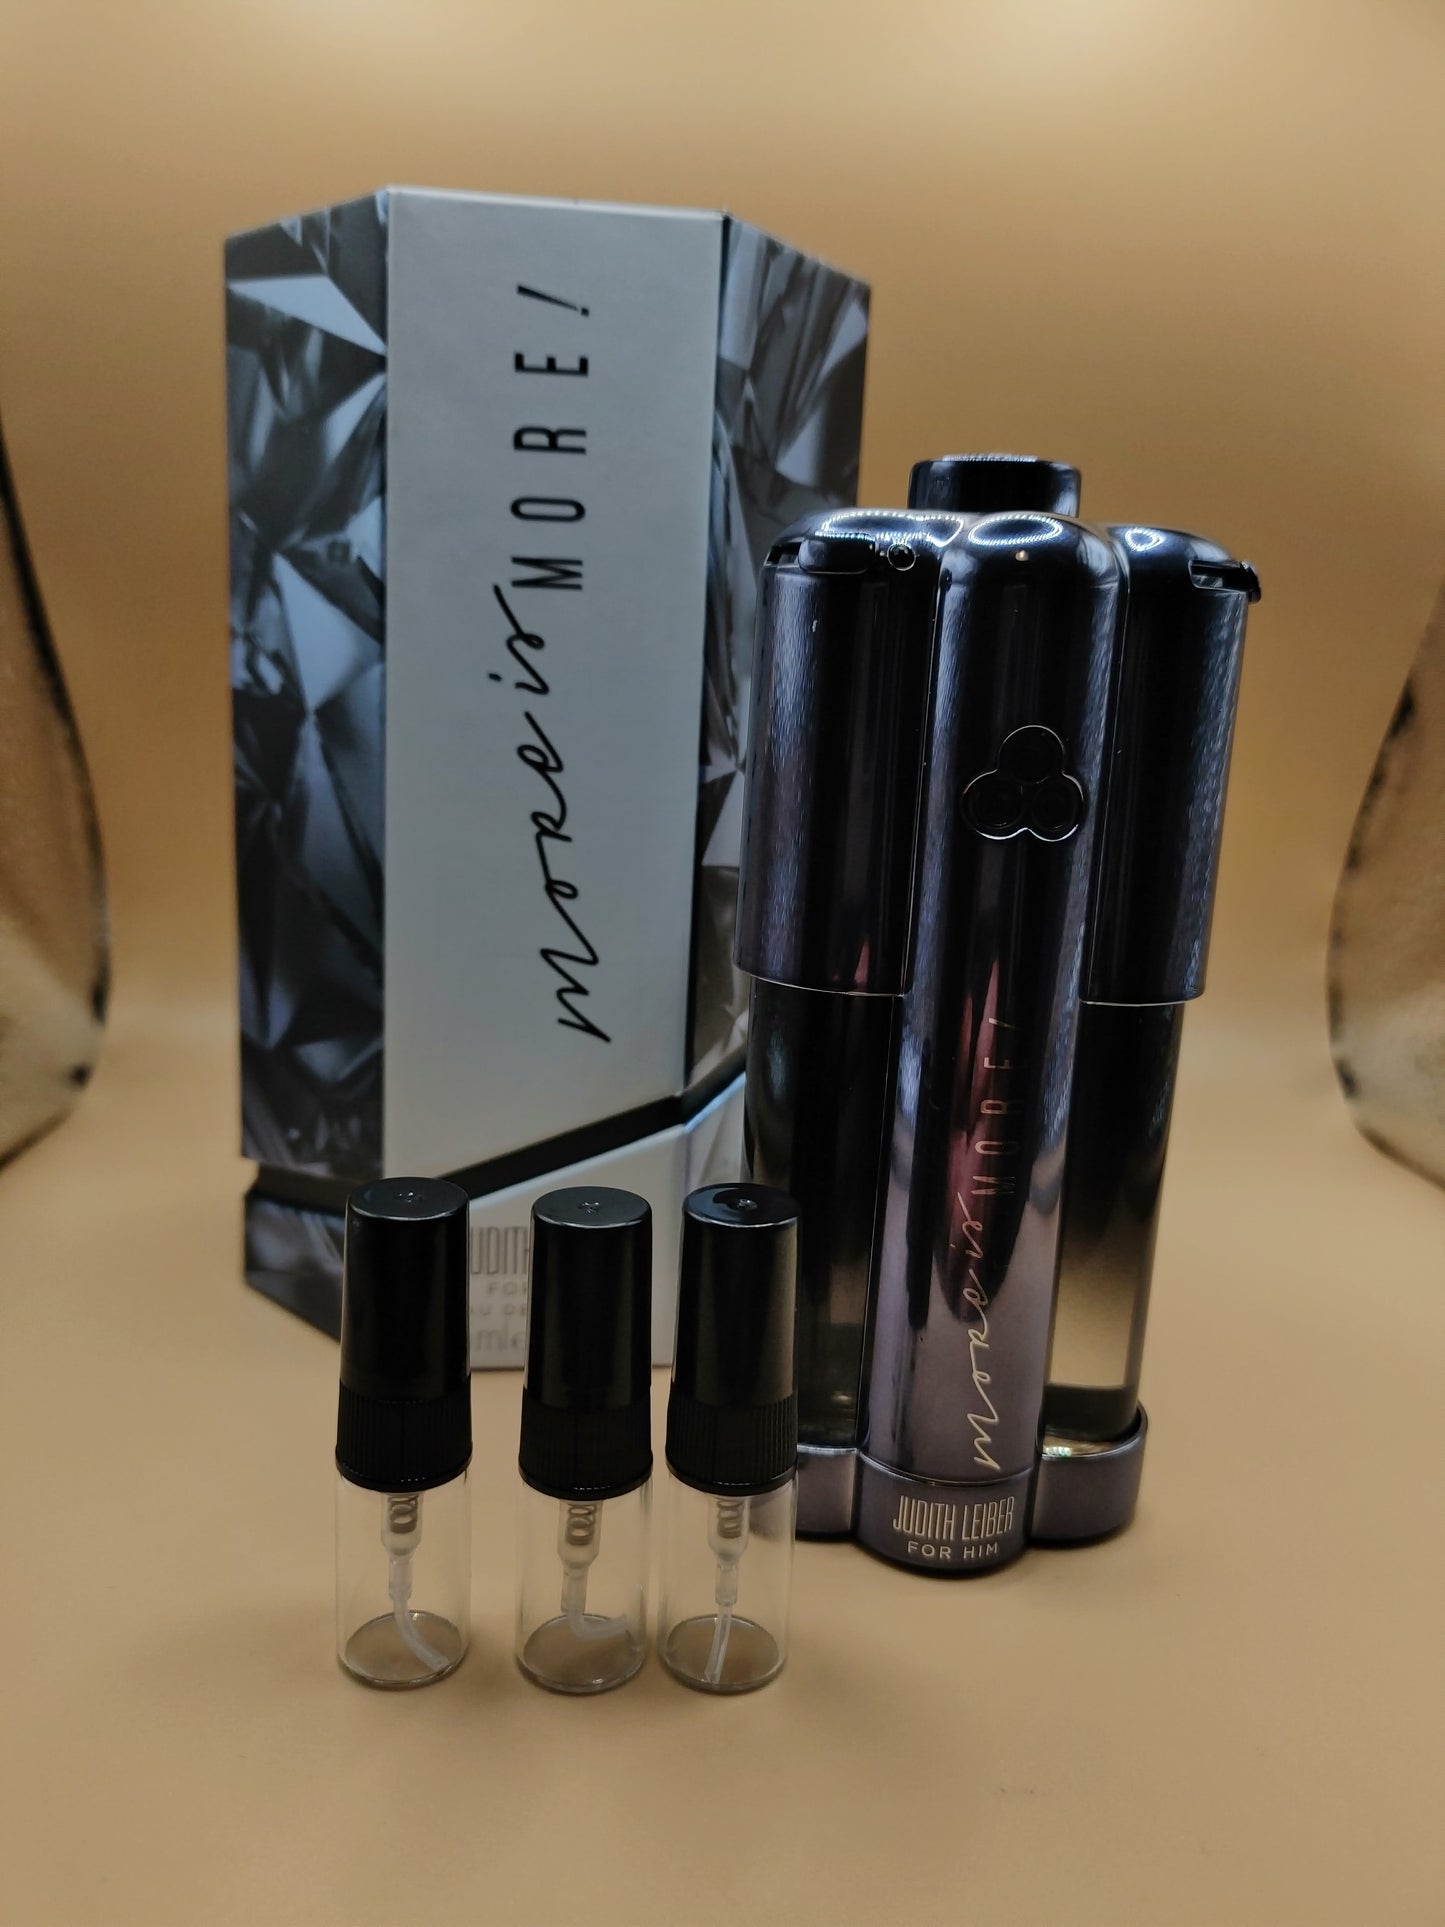 JUDITH LIEBER MORE IS MORE  2 ml SAMPLES. COME WITH FREE SAMPLE.